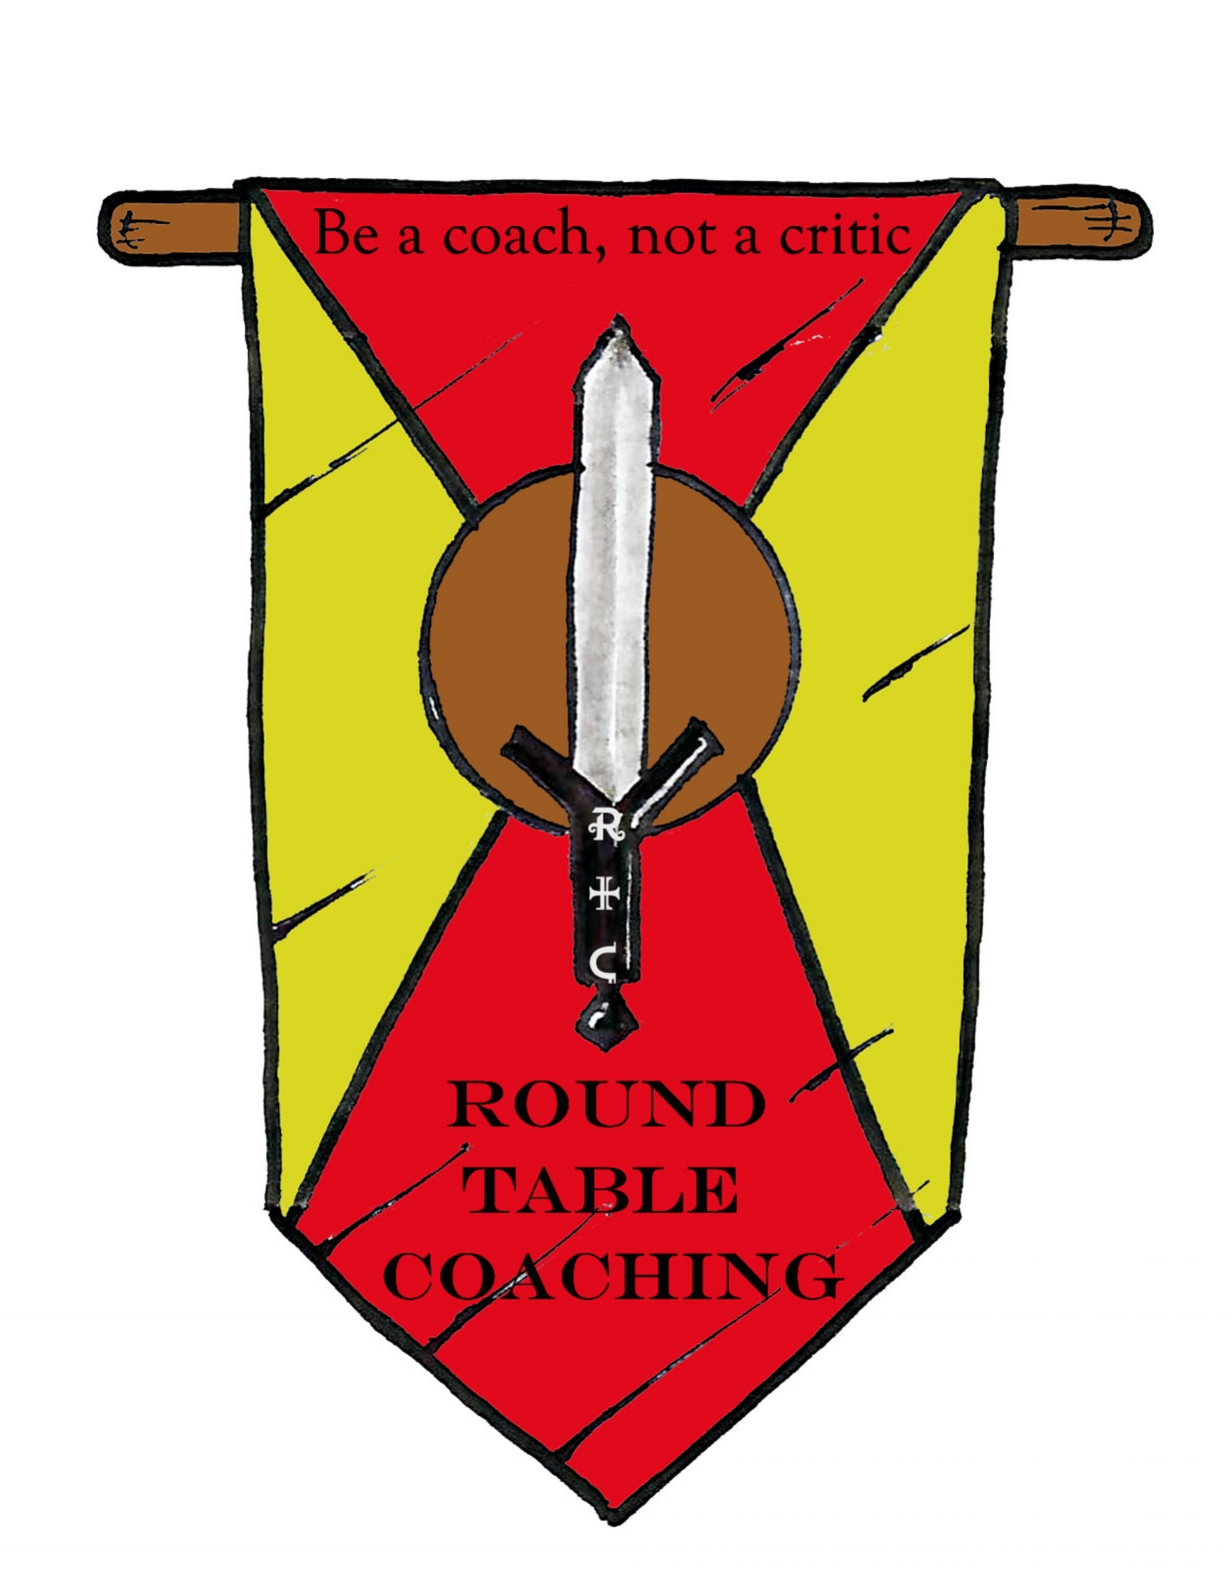 ROUND TABLE COACHING